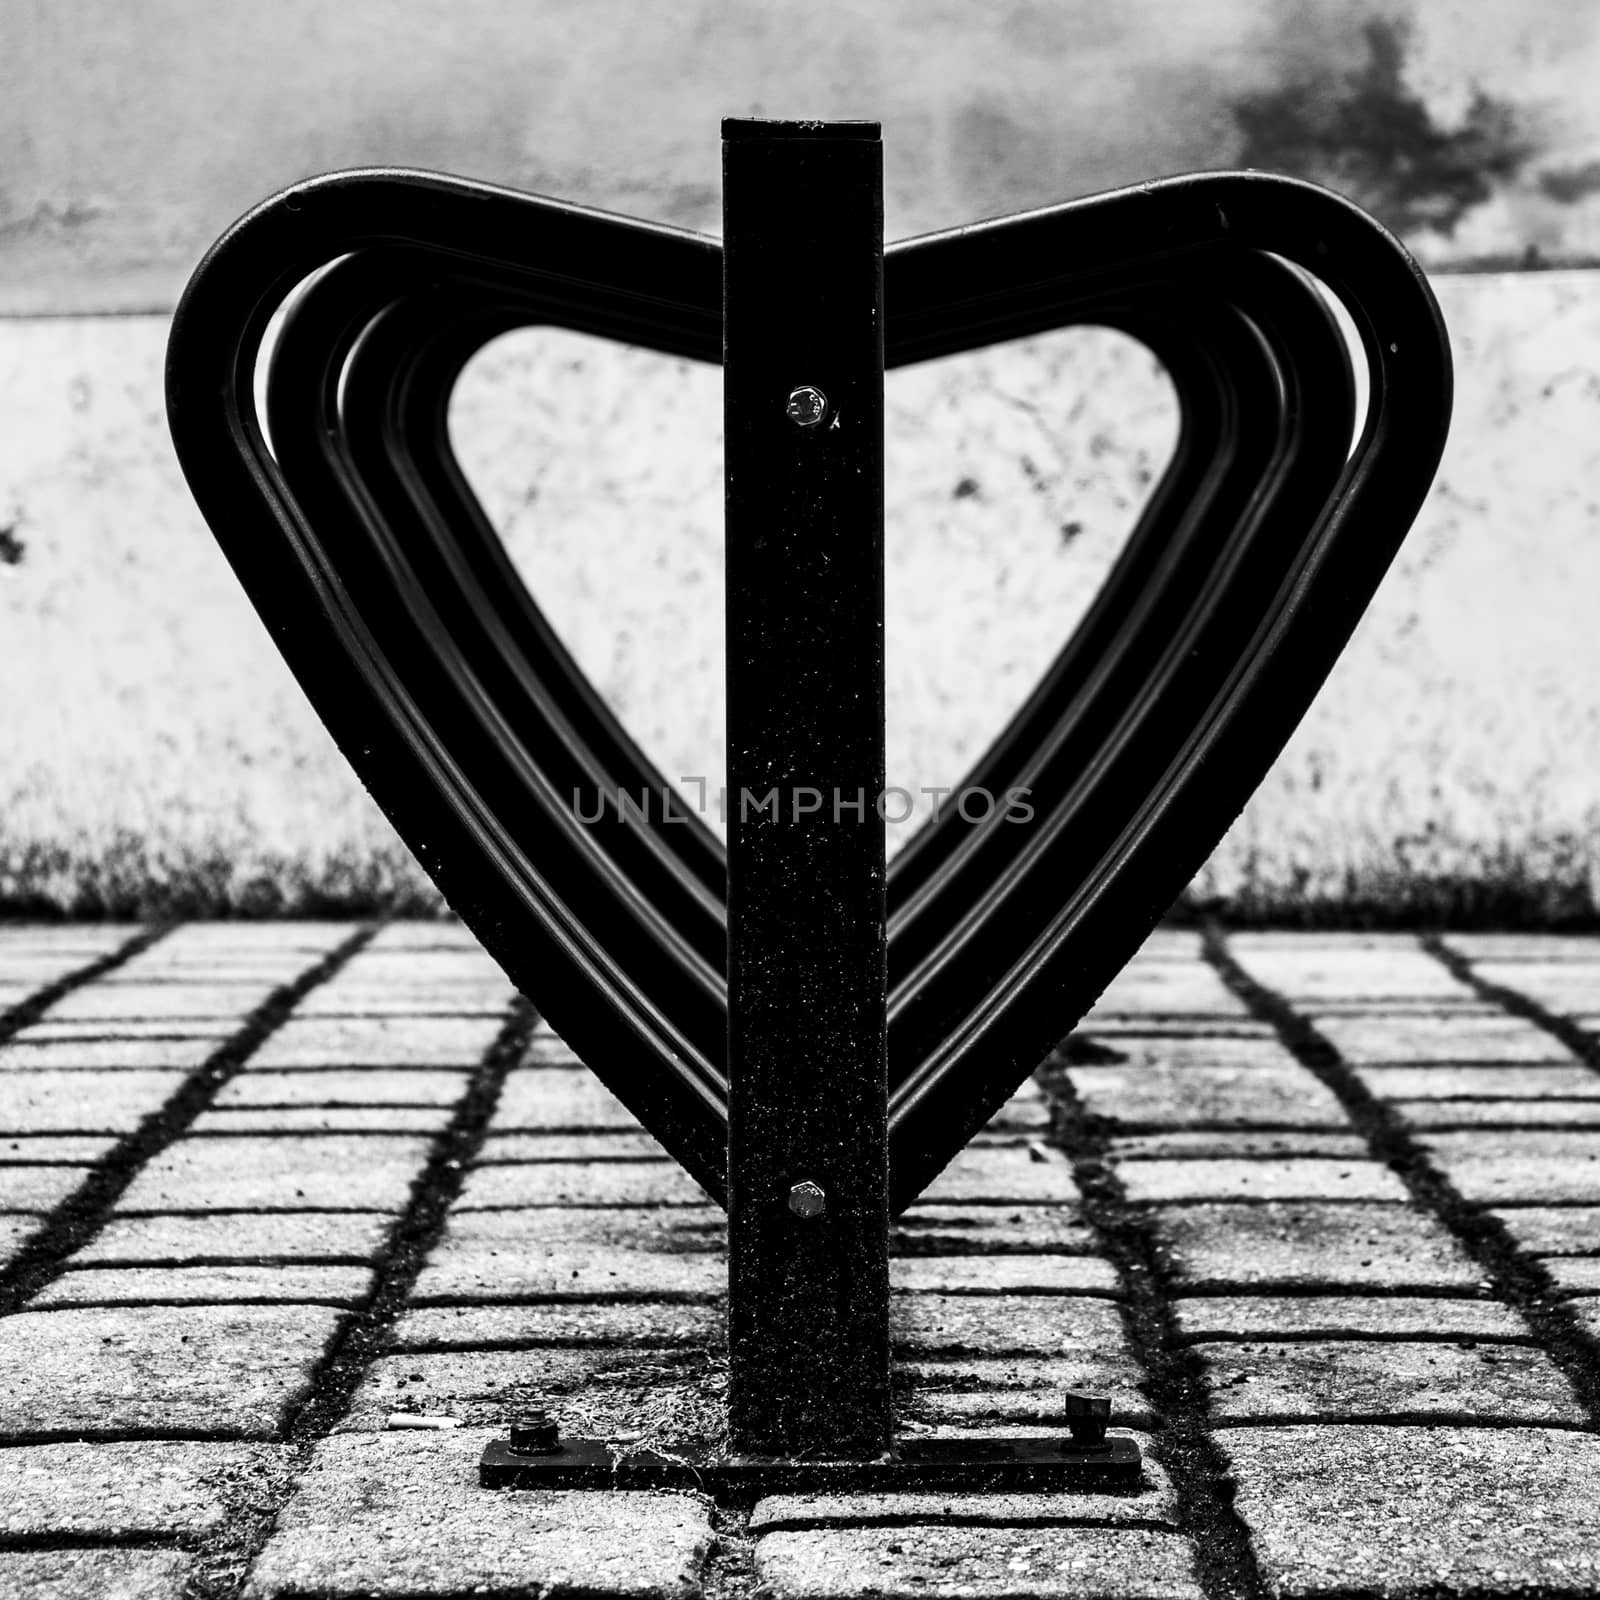 Heart-shaped bicycle rack in Ferrara Italy by enrico.lapponi